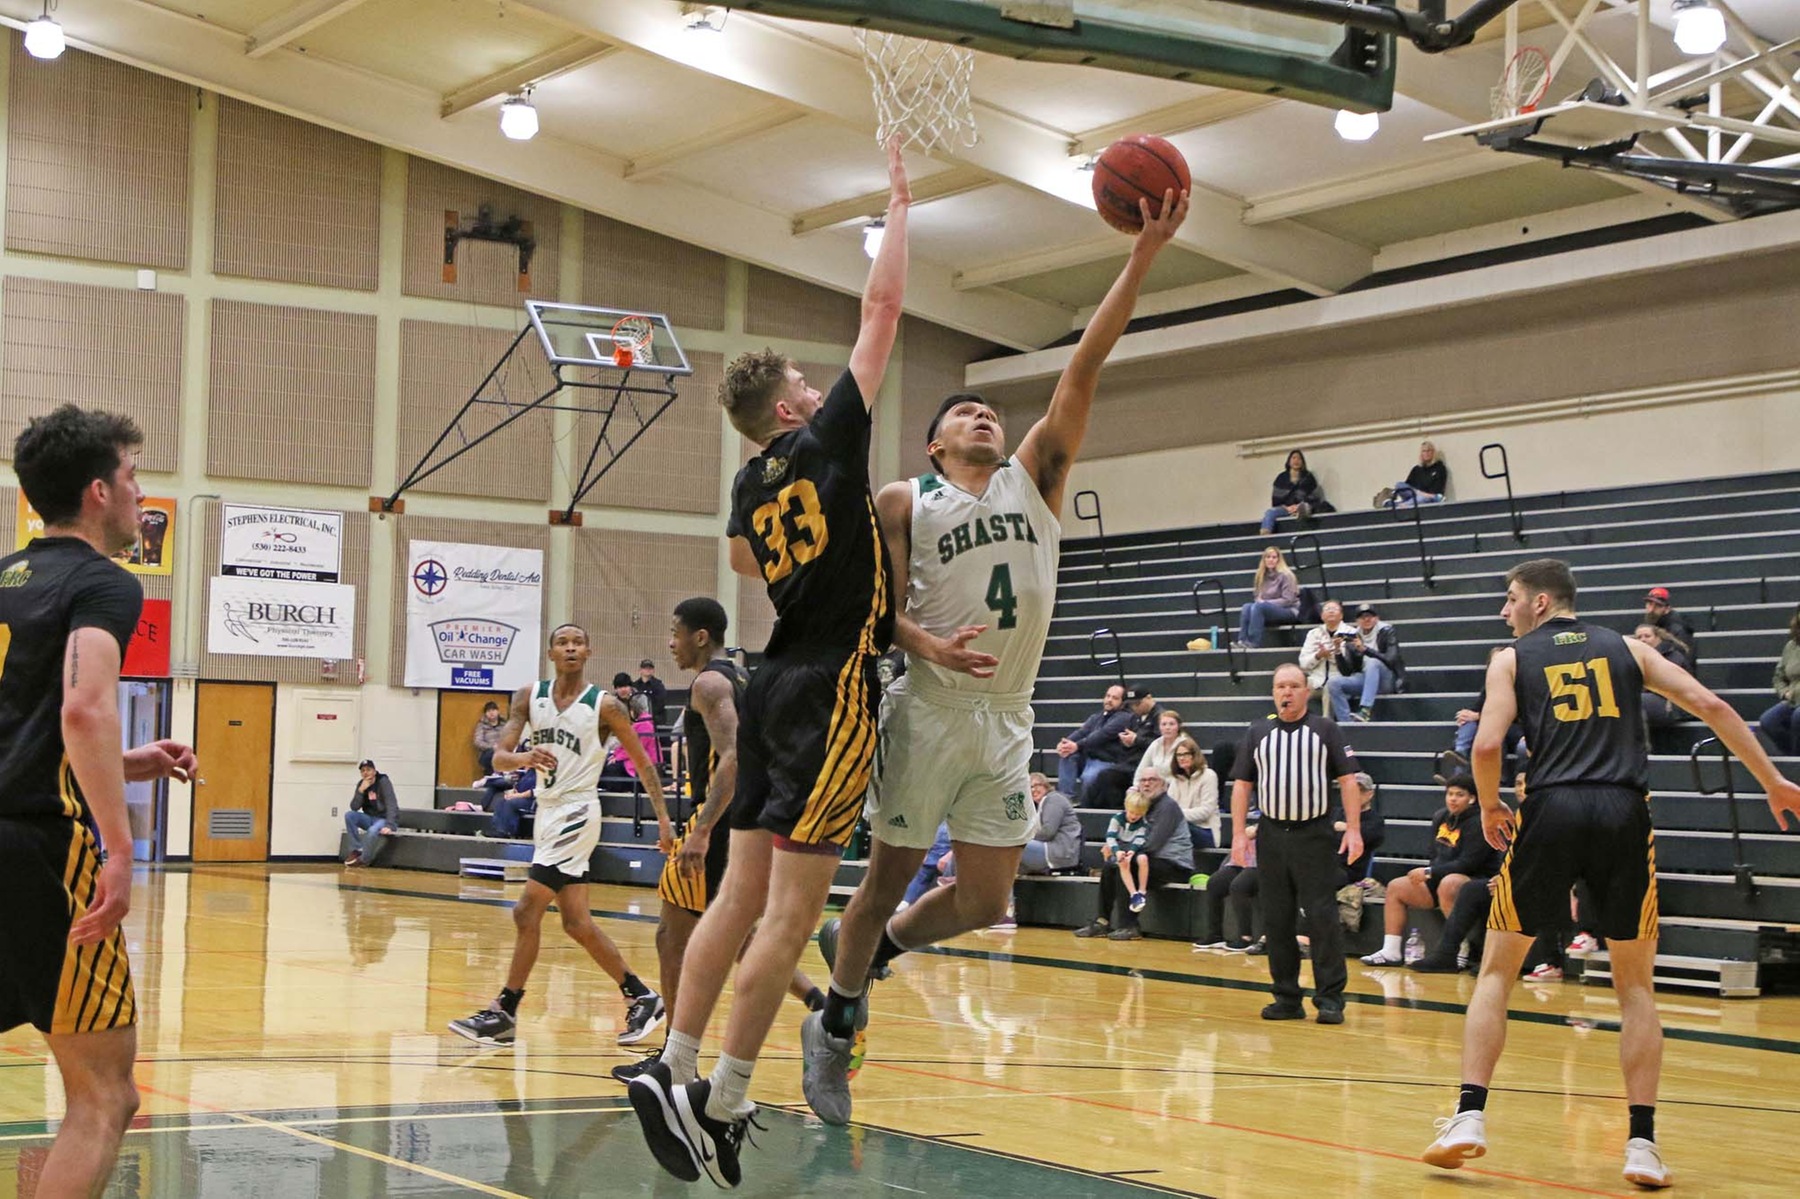 SHASTA DOWNS LASSEN 71-56 TO STAY ALIVE FOR GVC TITLE